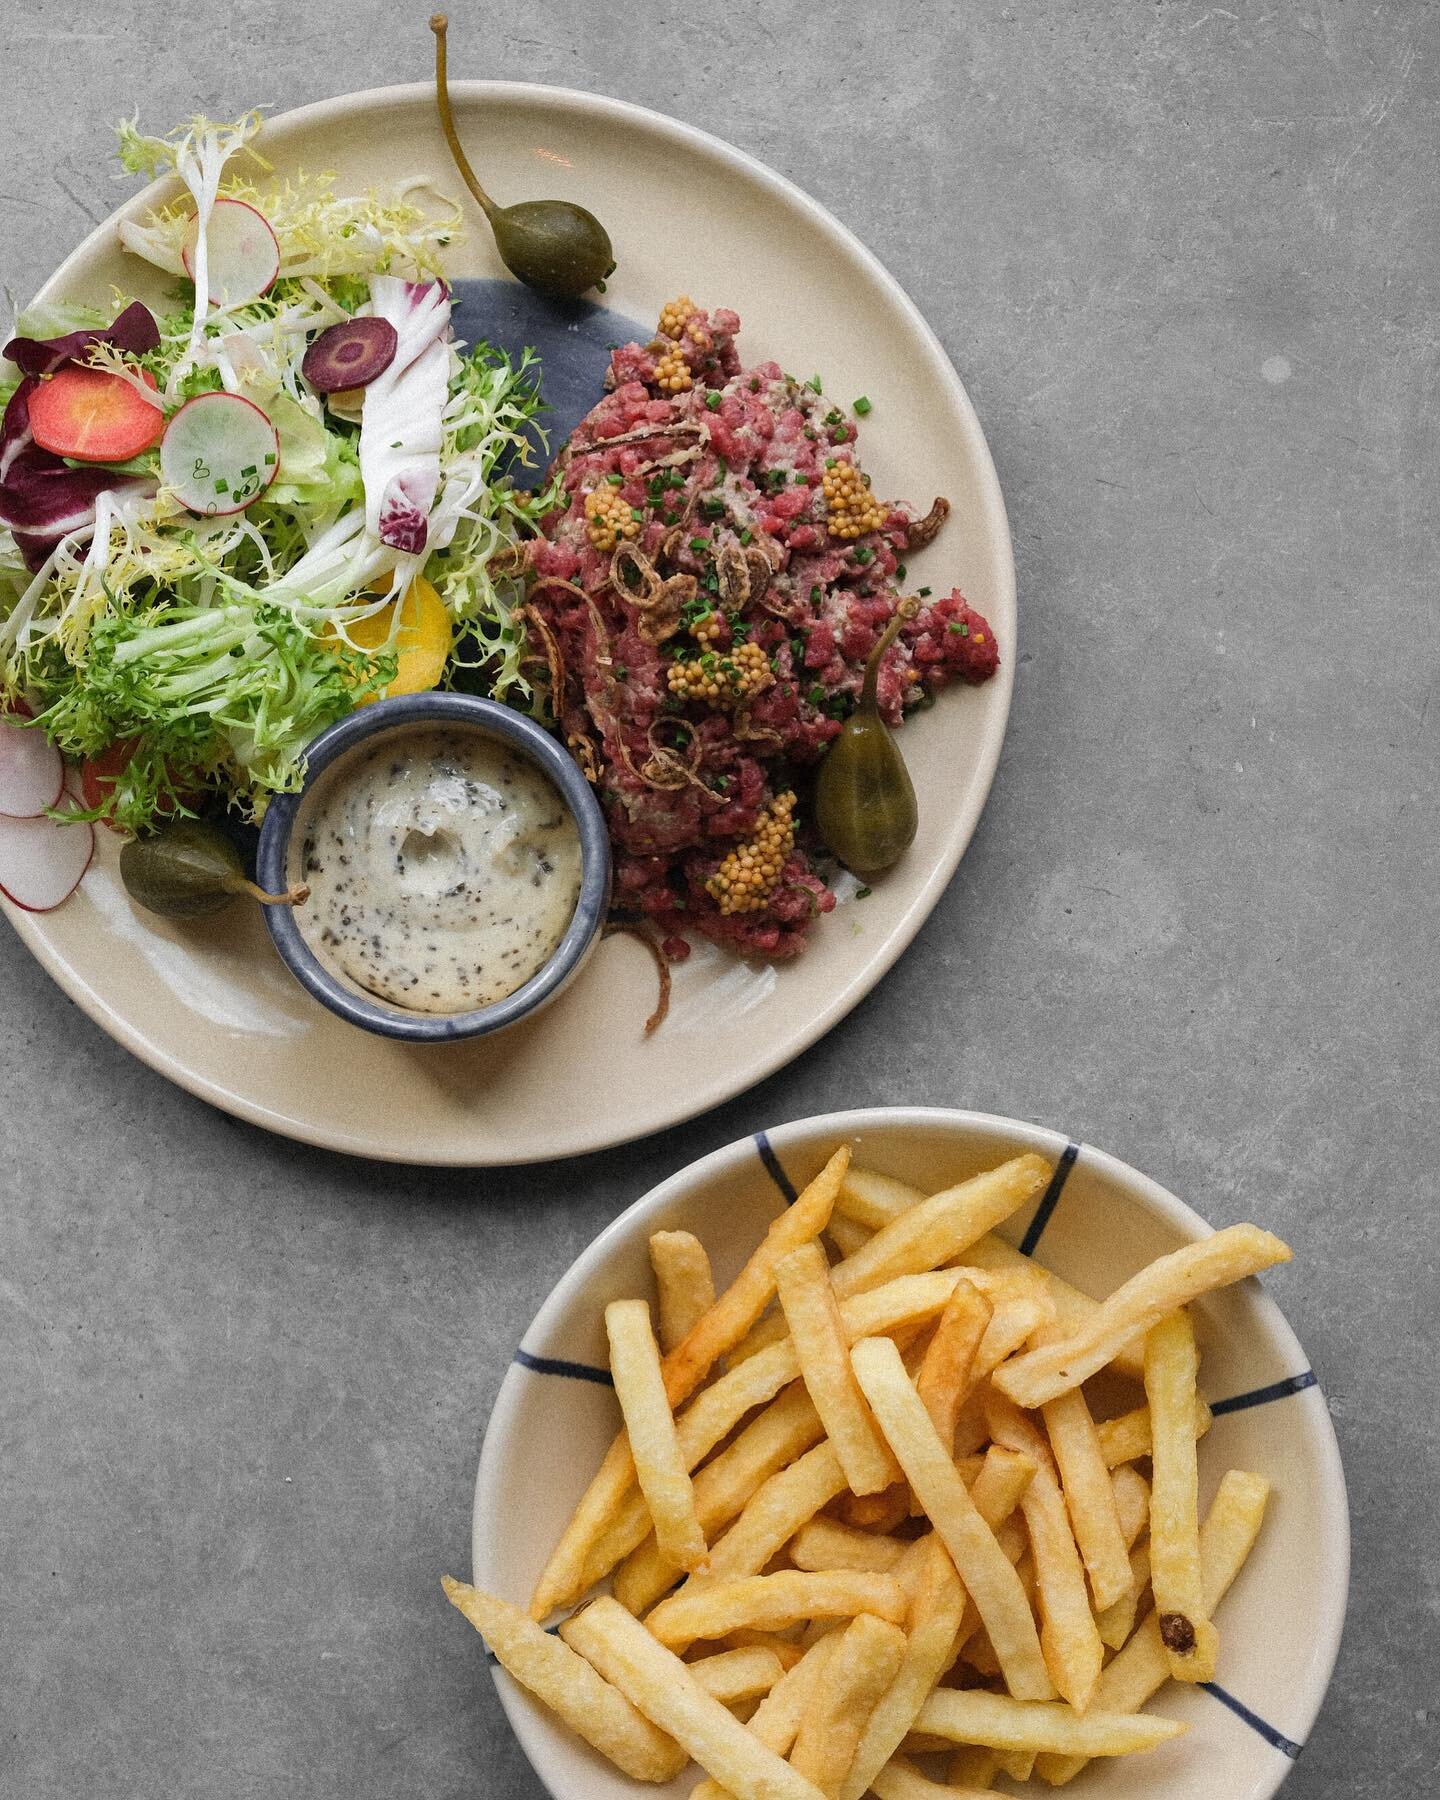 Try the classic beef tartare : chives, fried shallots, pickled mustard, seeds, salad, truffle mayo &amp; fresh fries 🔥

EVERYDAY from 12 pm-2.45pm &amp; 6pm-9.45pm

#GrandCanal #Brussels #BelgianFries